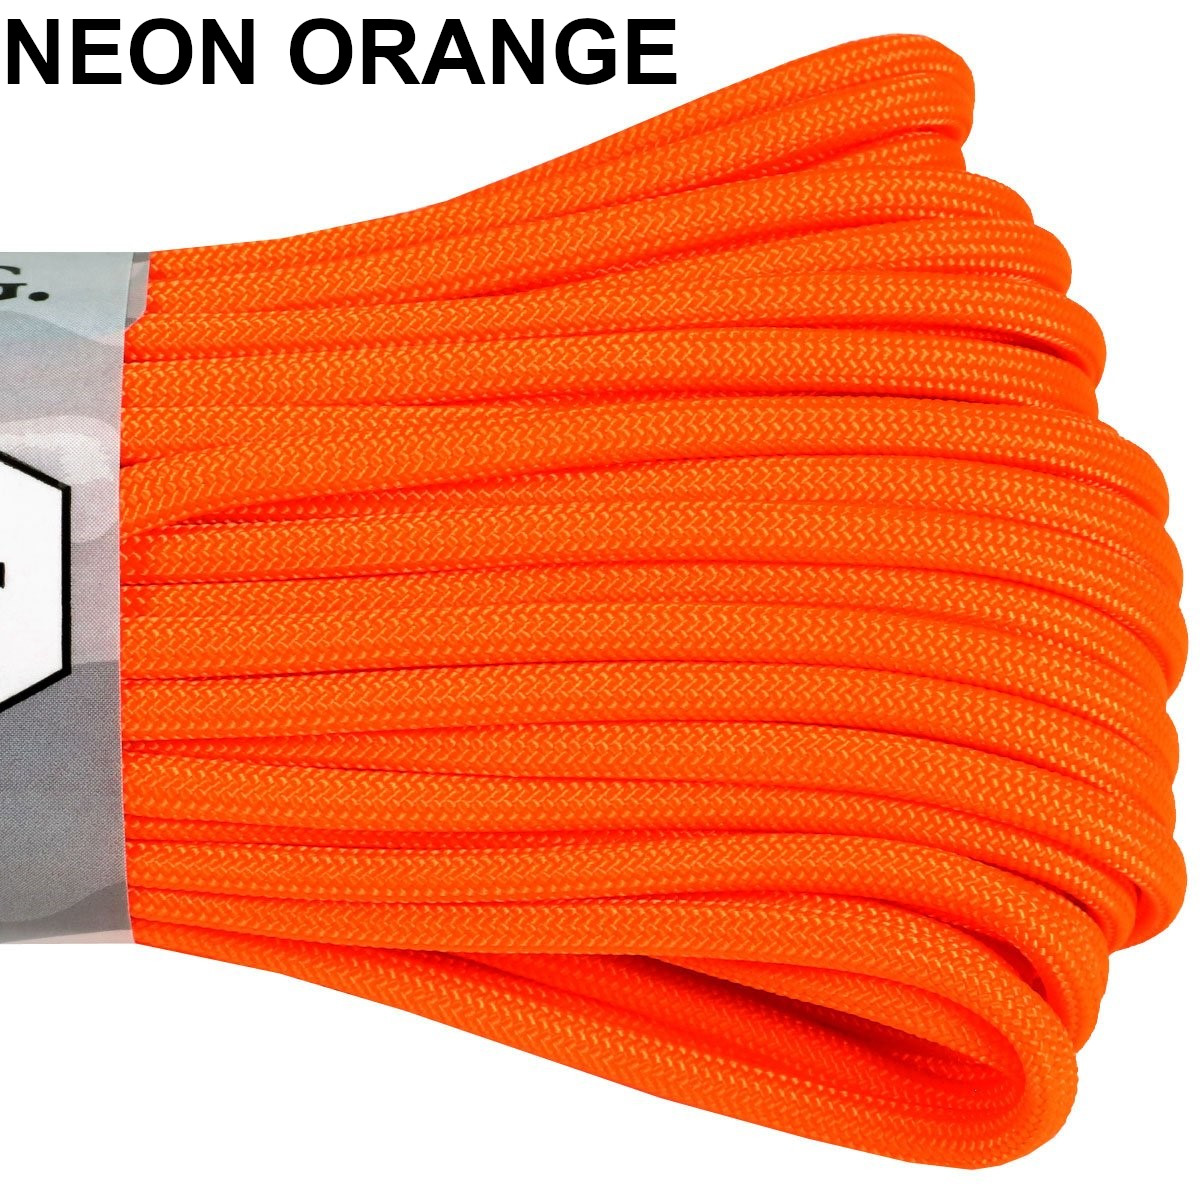 550 paracord-solid colors - Ropes & paracords